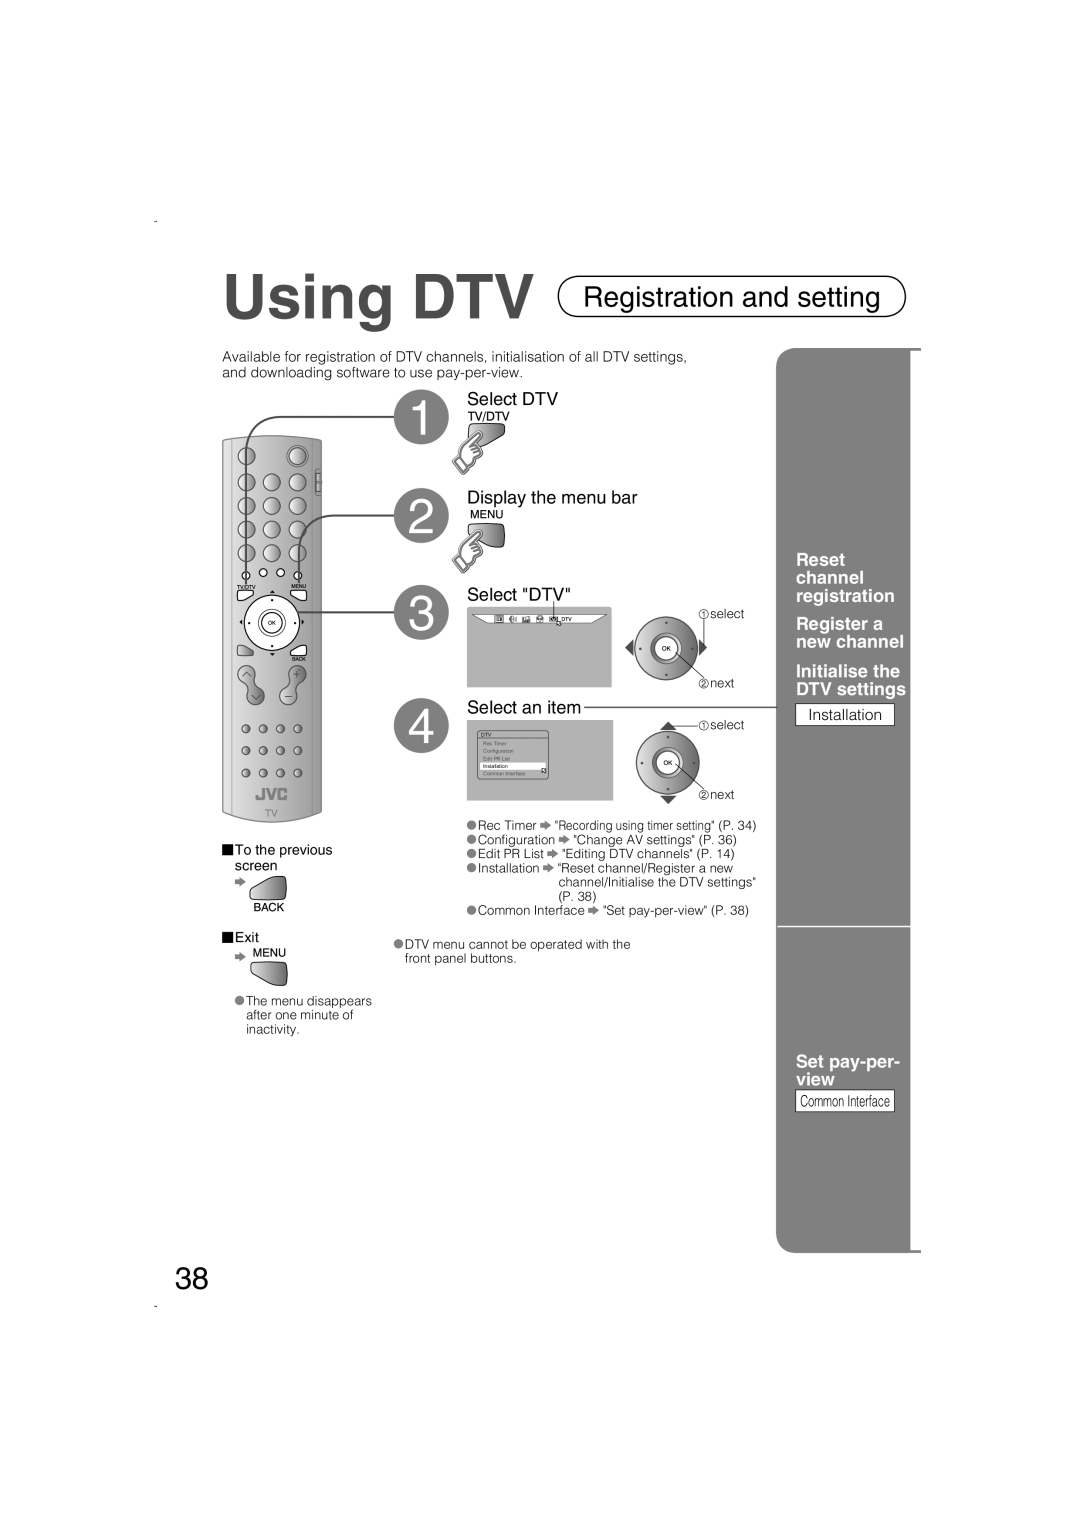 JVC LCT1847-001B-U Using DTV Registration and setting, Reset channel registration, Initialise the DTV settings, Select DTV 